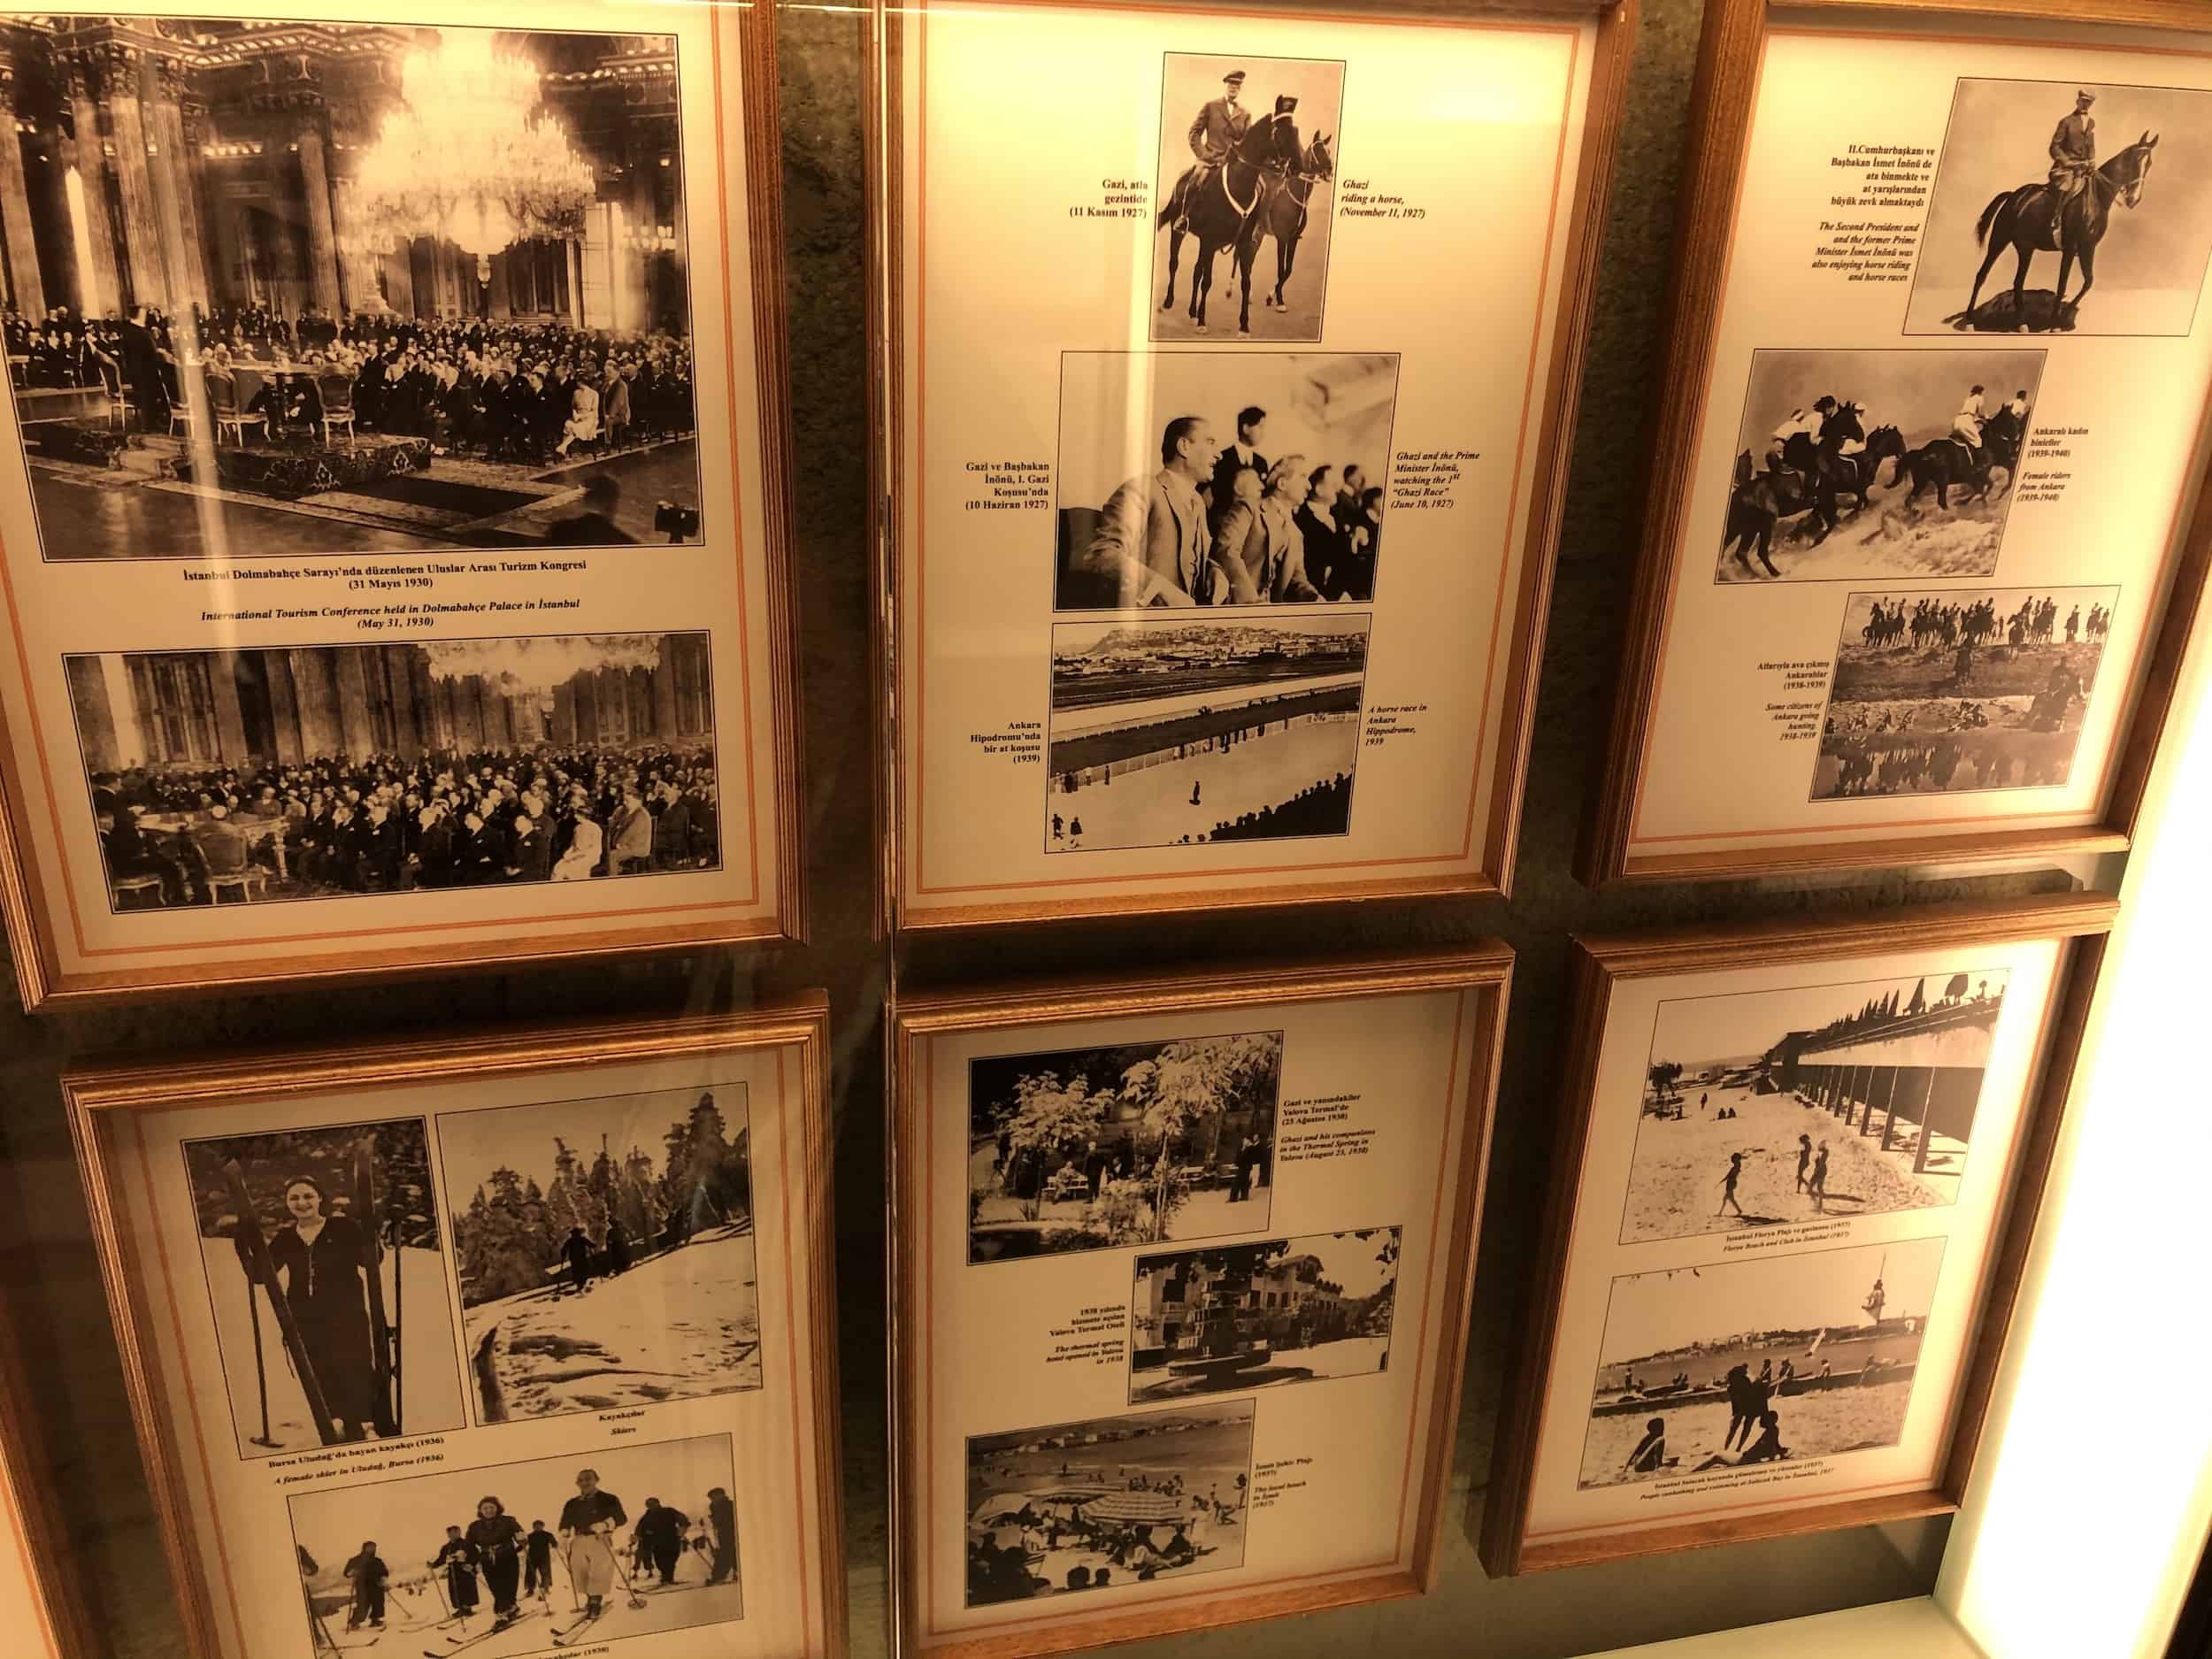 Developments in tourism at the Atatürk and War of Independence Museum